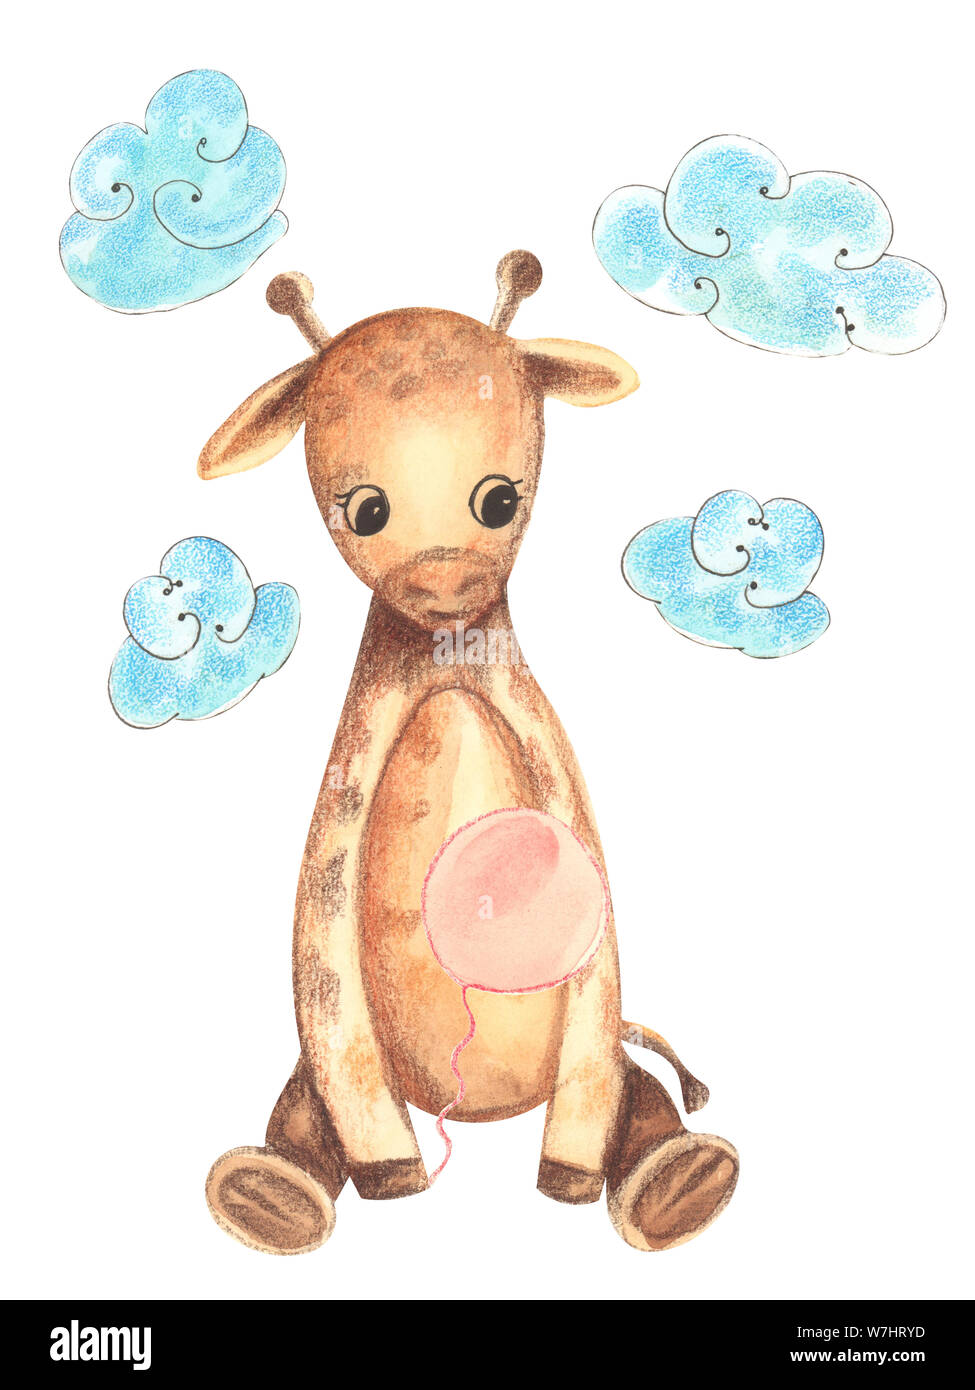 Illustration of a colorful watercolor animal character giraffe sitting among blue clouds on a white isolated background. Stock Photo